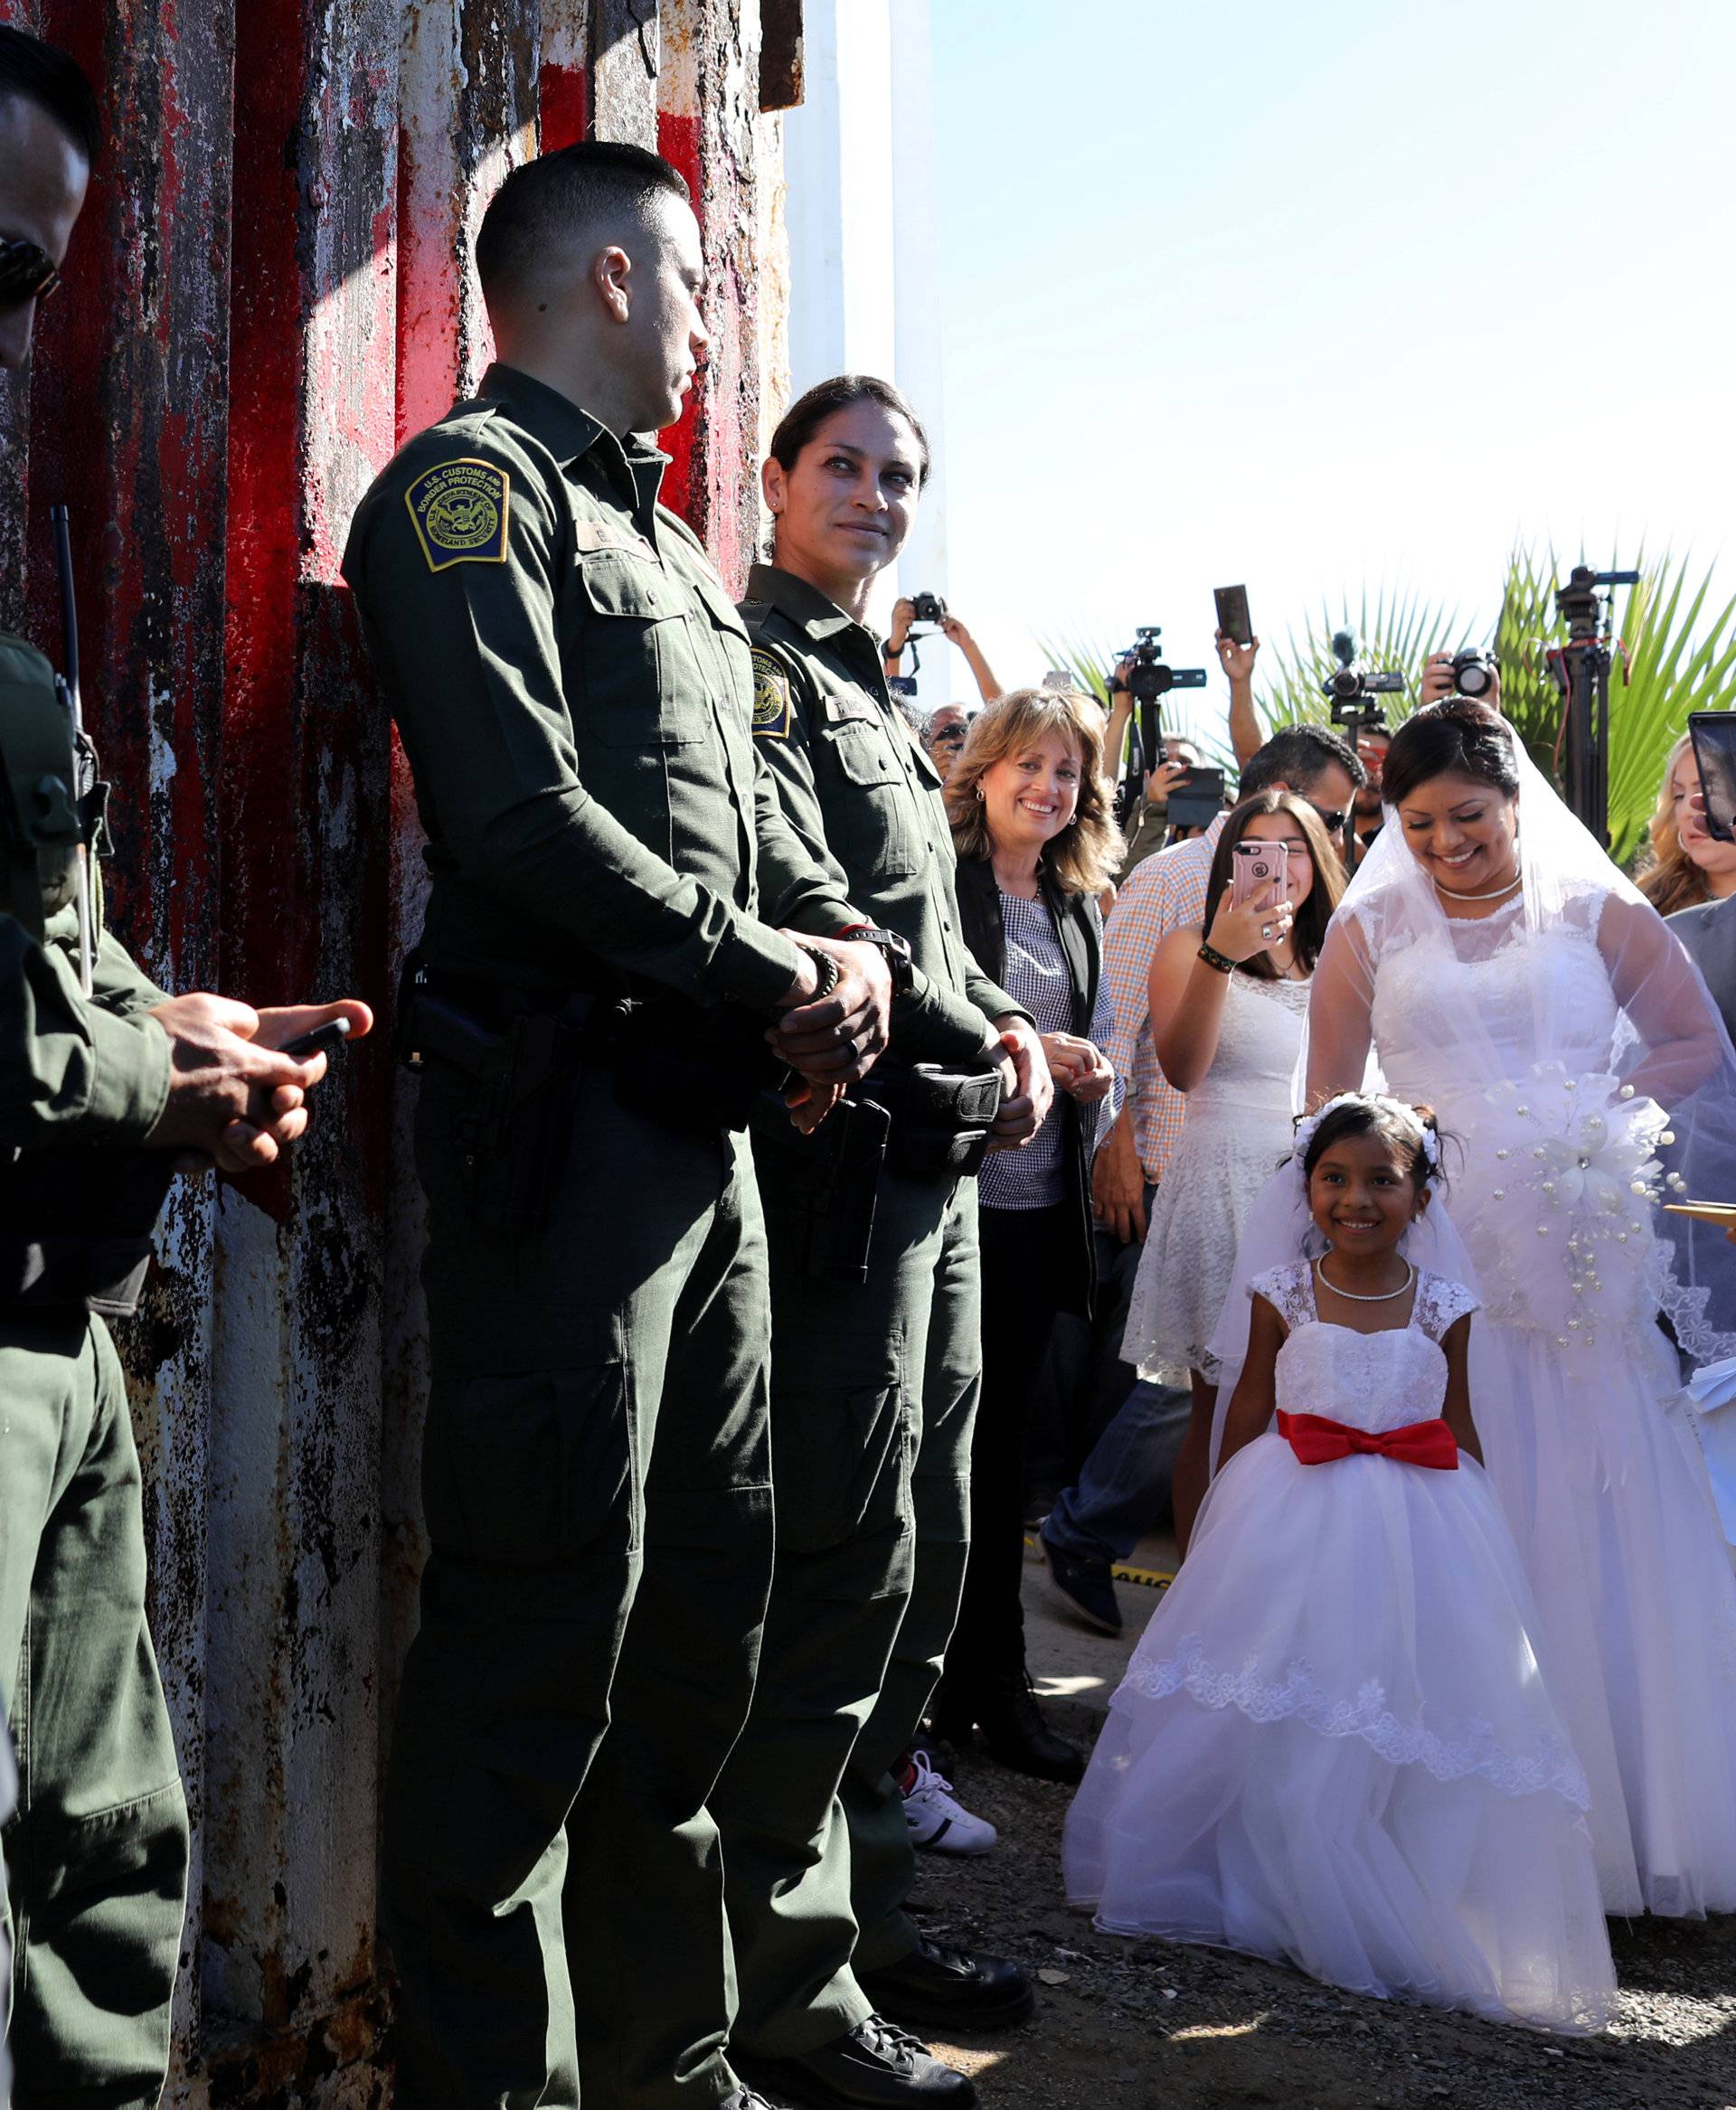 U.S. resident Brian Houston arrives to marry Evelia Reyes as Reyes' daughter Alexis looks on when U.S. Border patrol agents opened a single gate in the border wall to allow selected families short visits visit along the U.S. Mexico border in San Diego